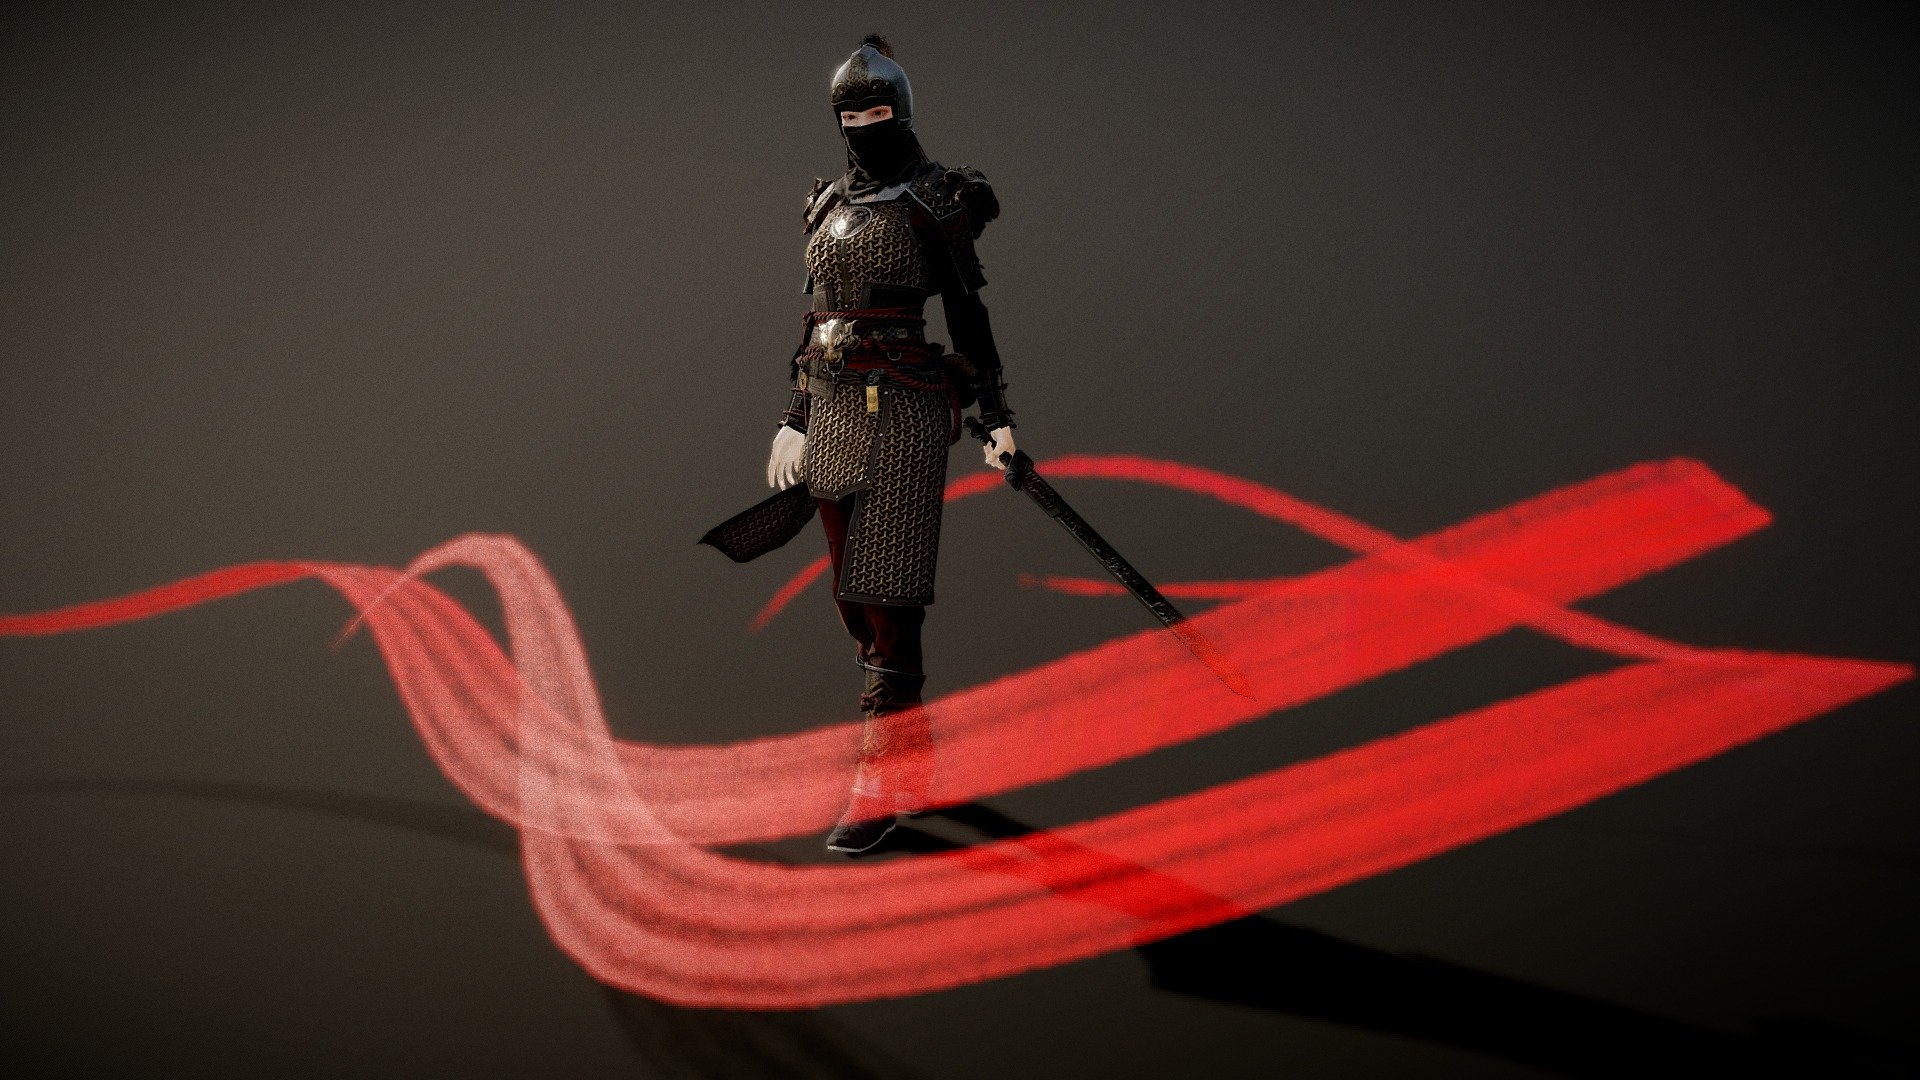 Character design with RPG style 

This production on Sketchfab included: 

1 3d model